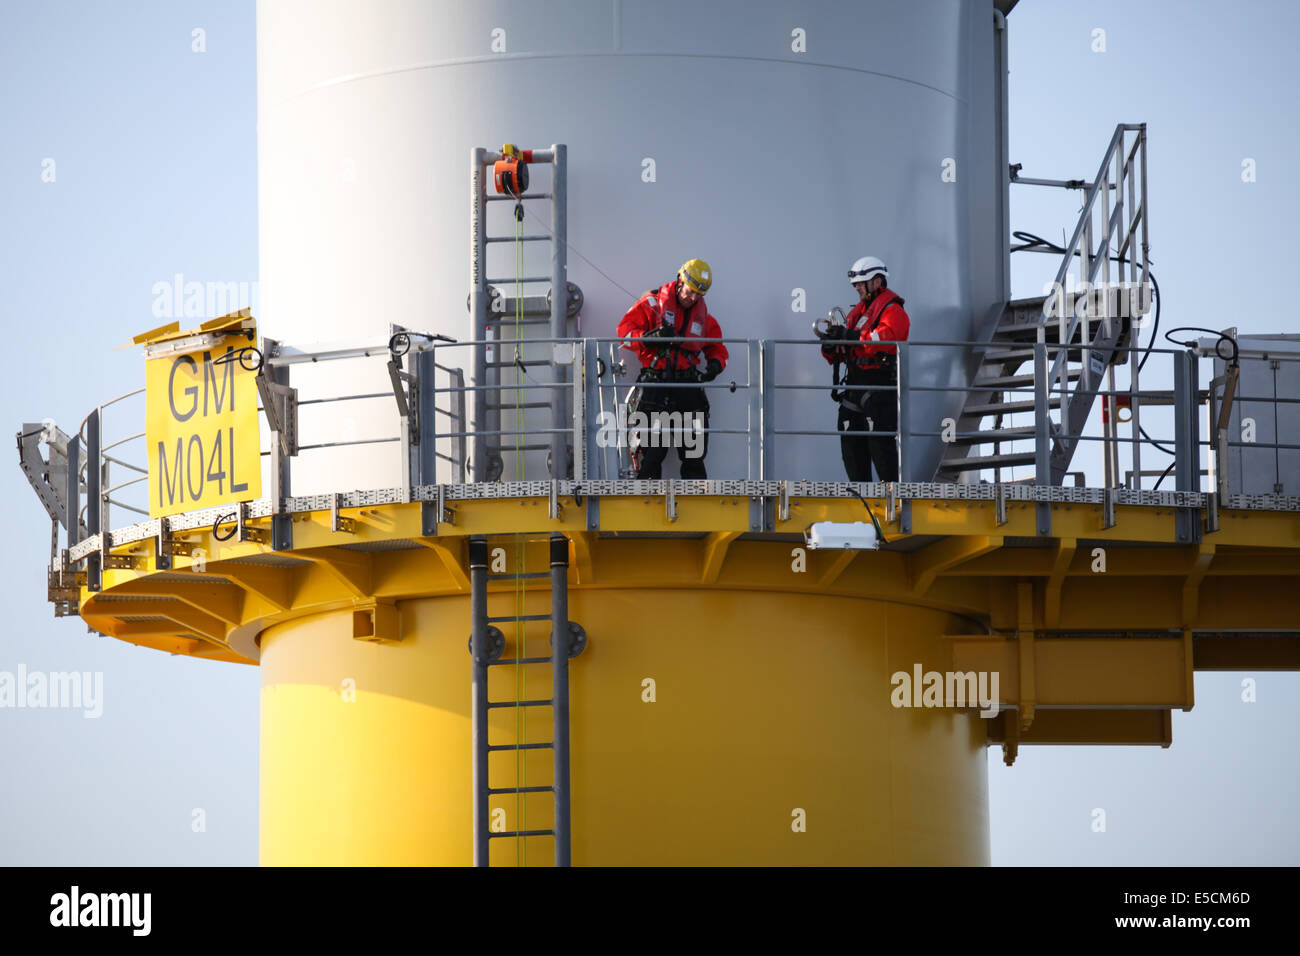 Workers on a turbine tower on the Gwynt y Mor Wind Farm off the coast of North Wales during the Construction Phase in 2014. Stock Photo